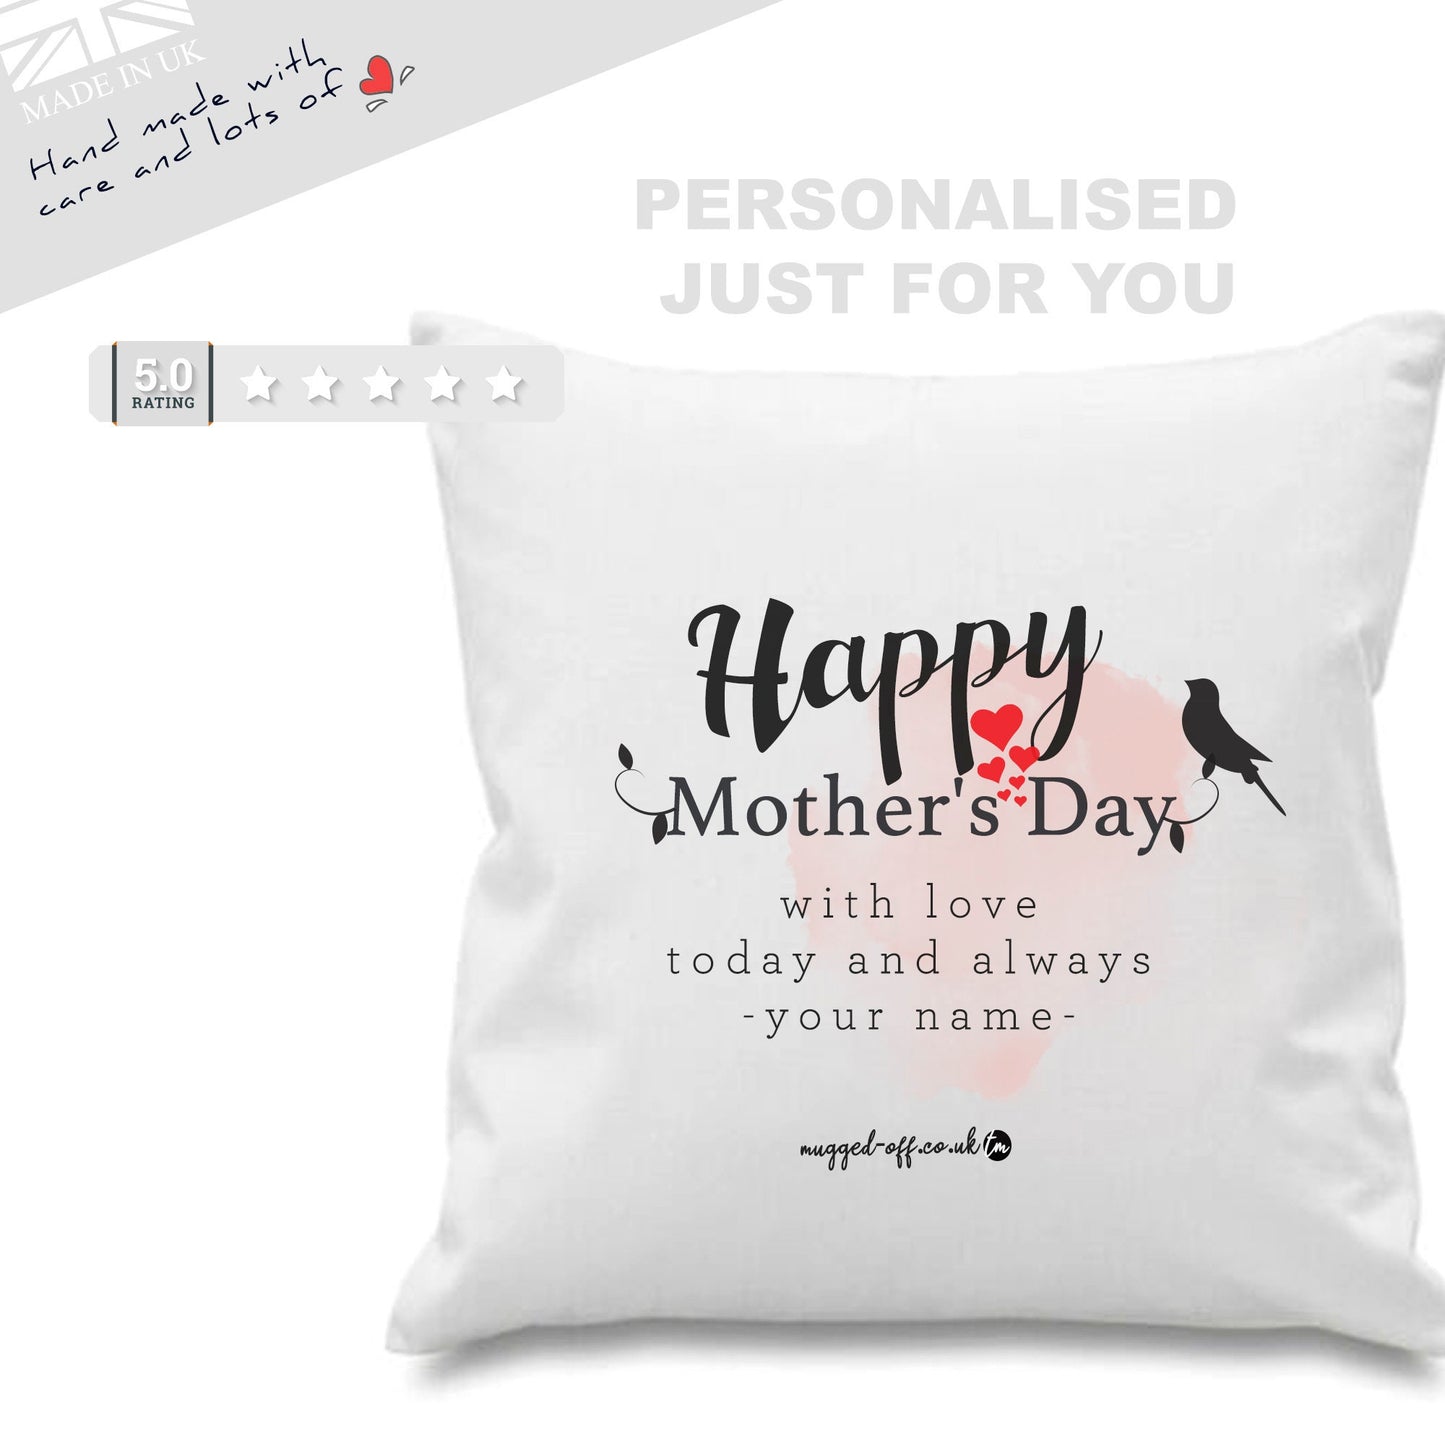 Cushion covers - cushion covers personalised - mothers day gifts xmas birthday